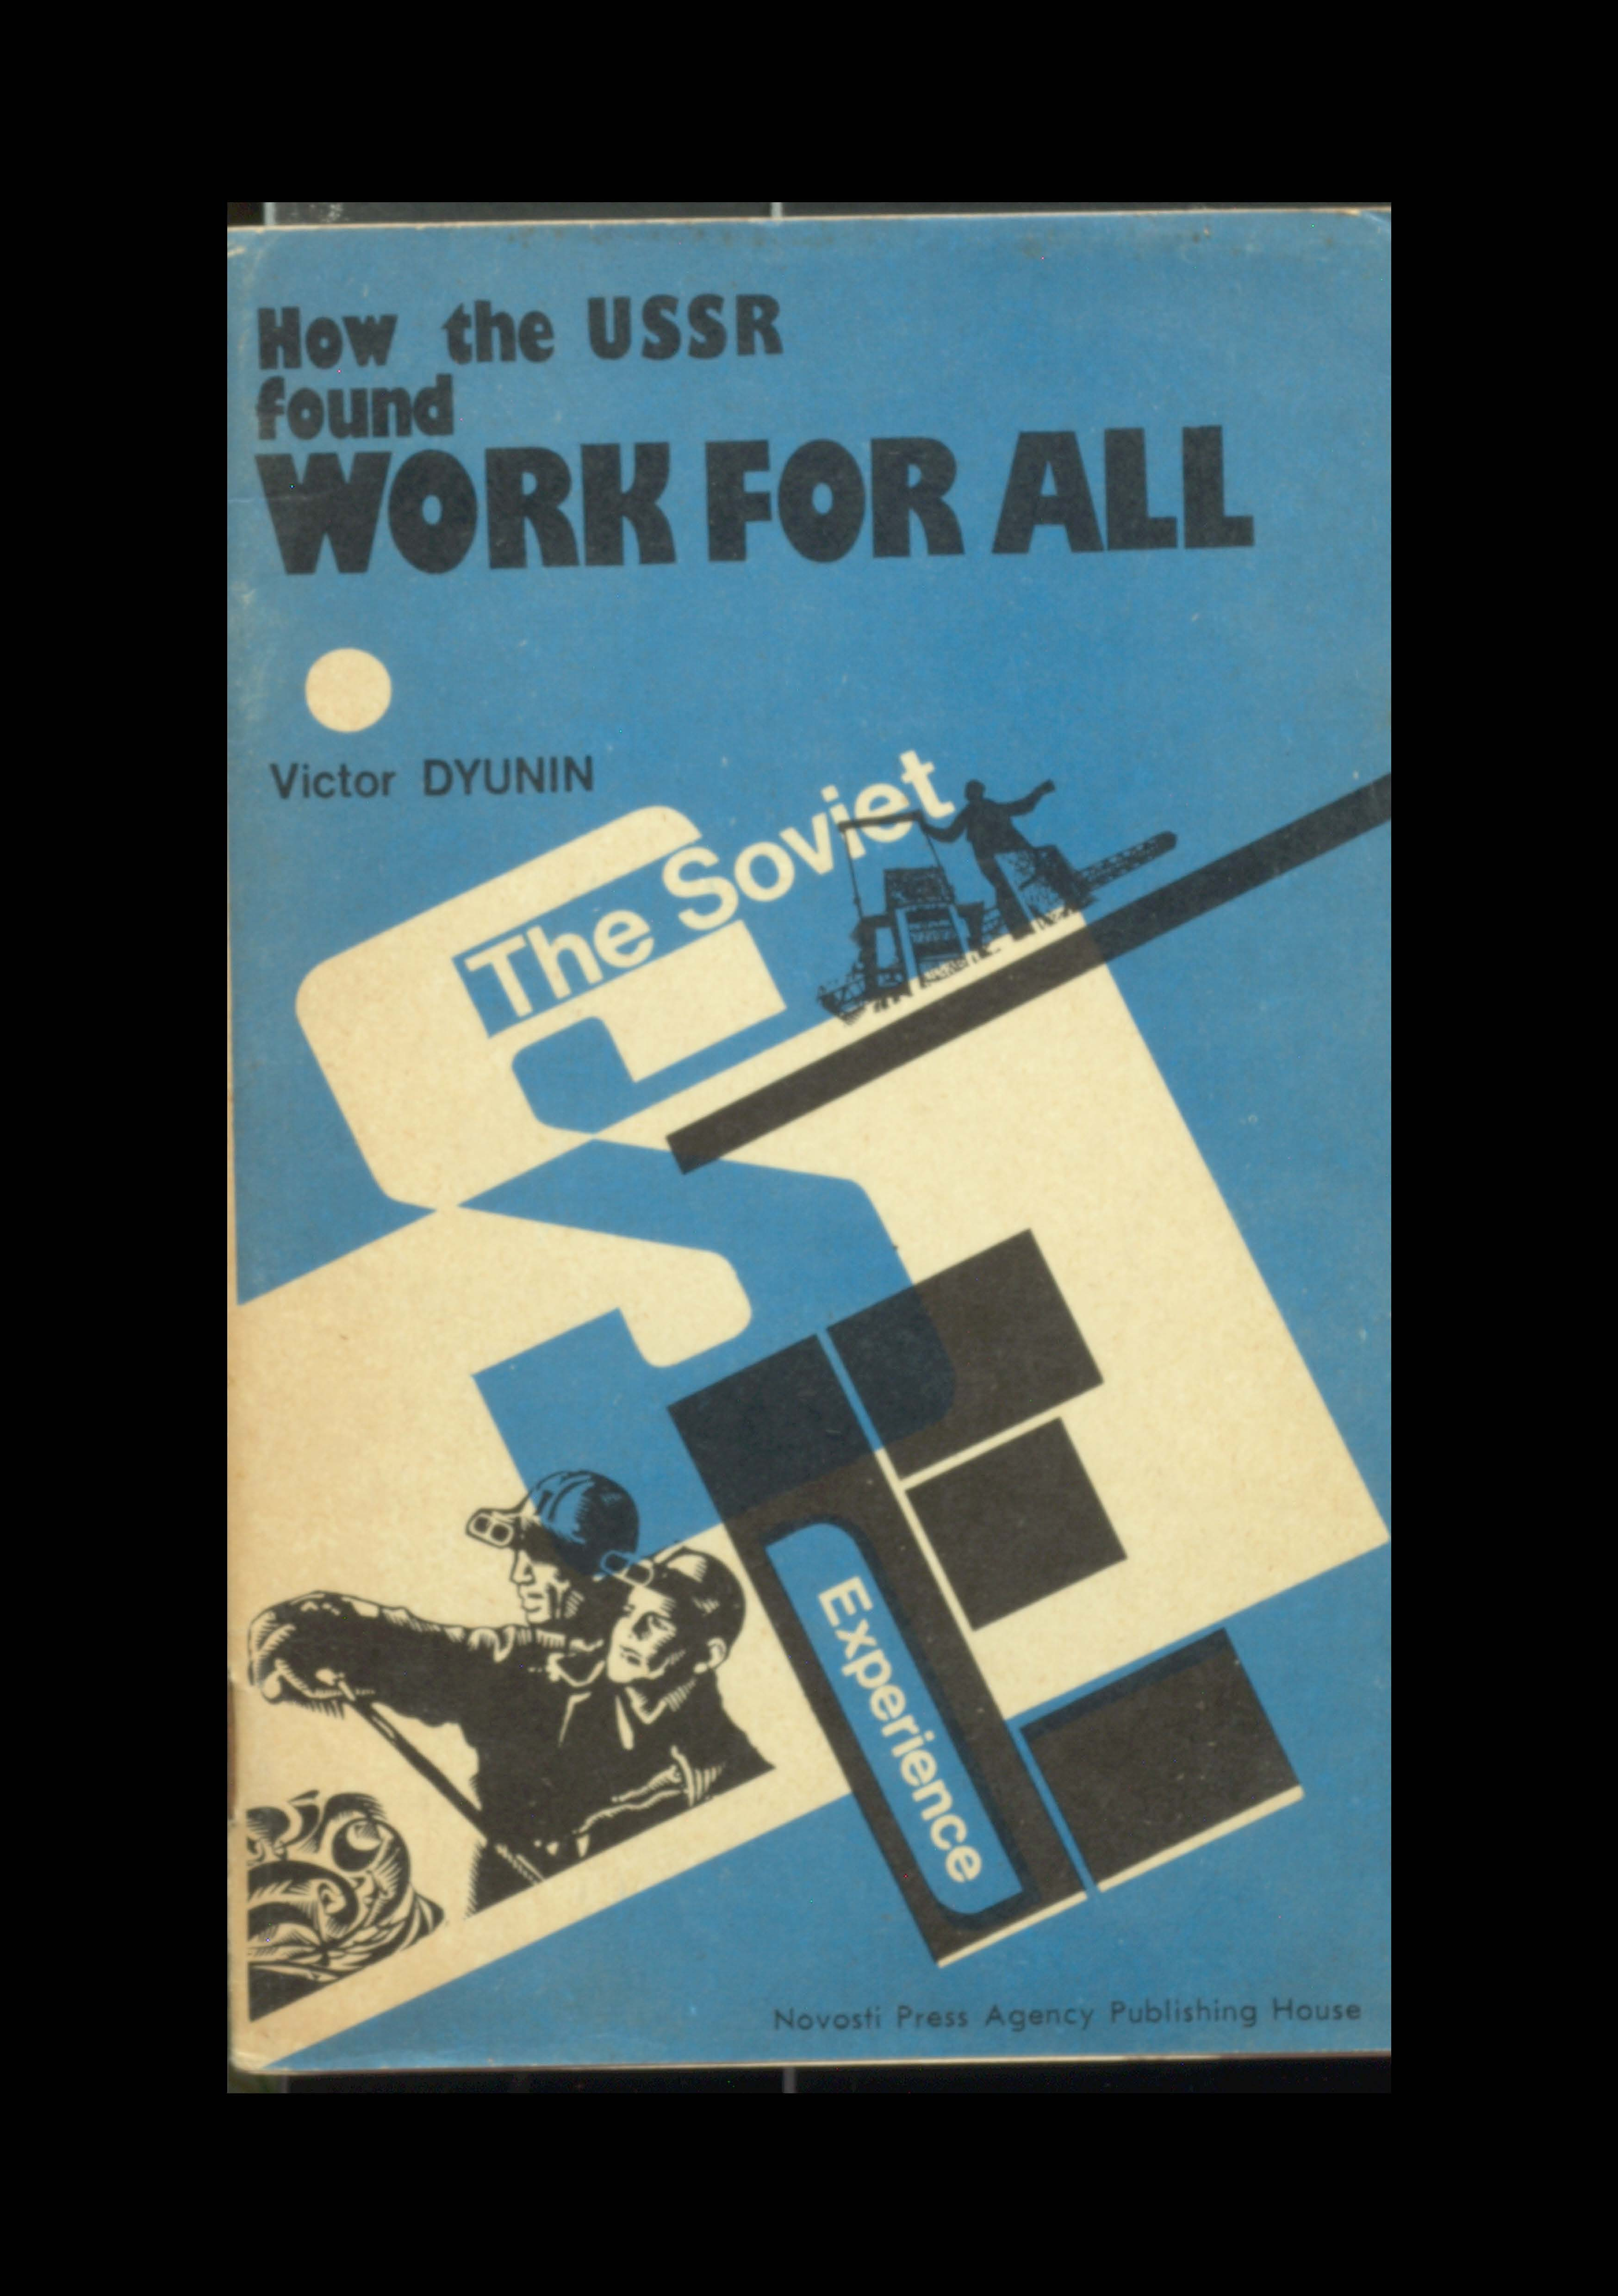 HOW THE USSR FOUND WORK FOR ALL